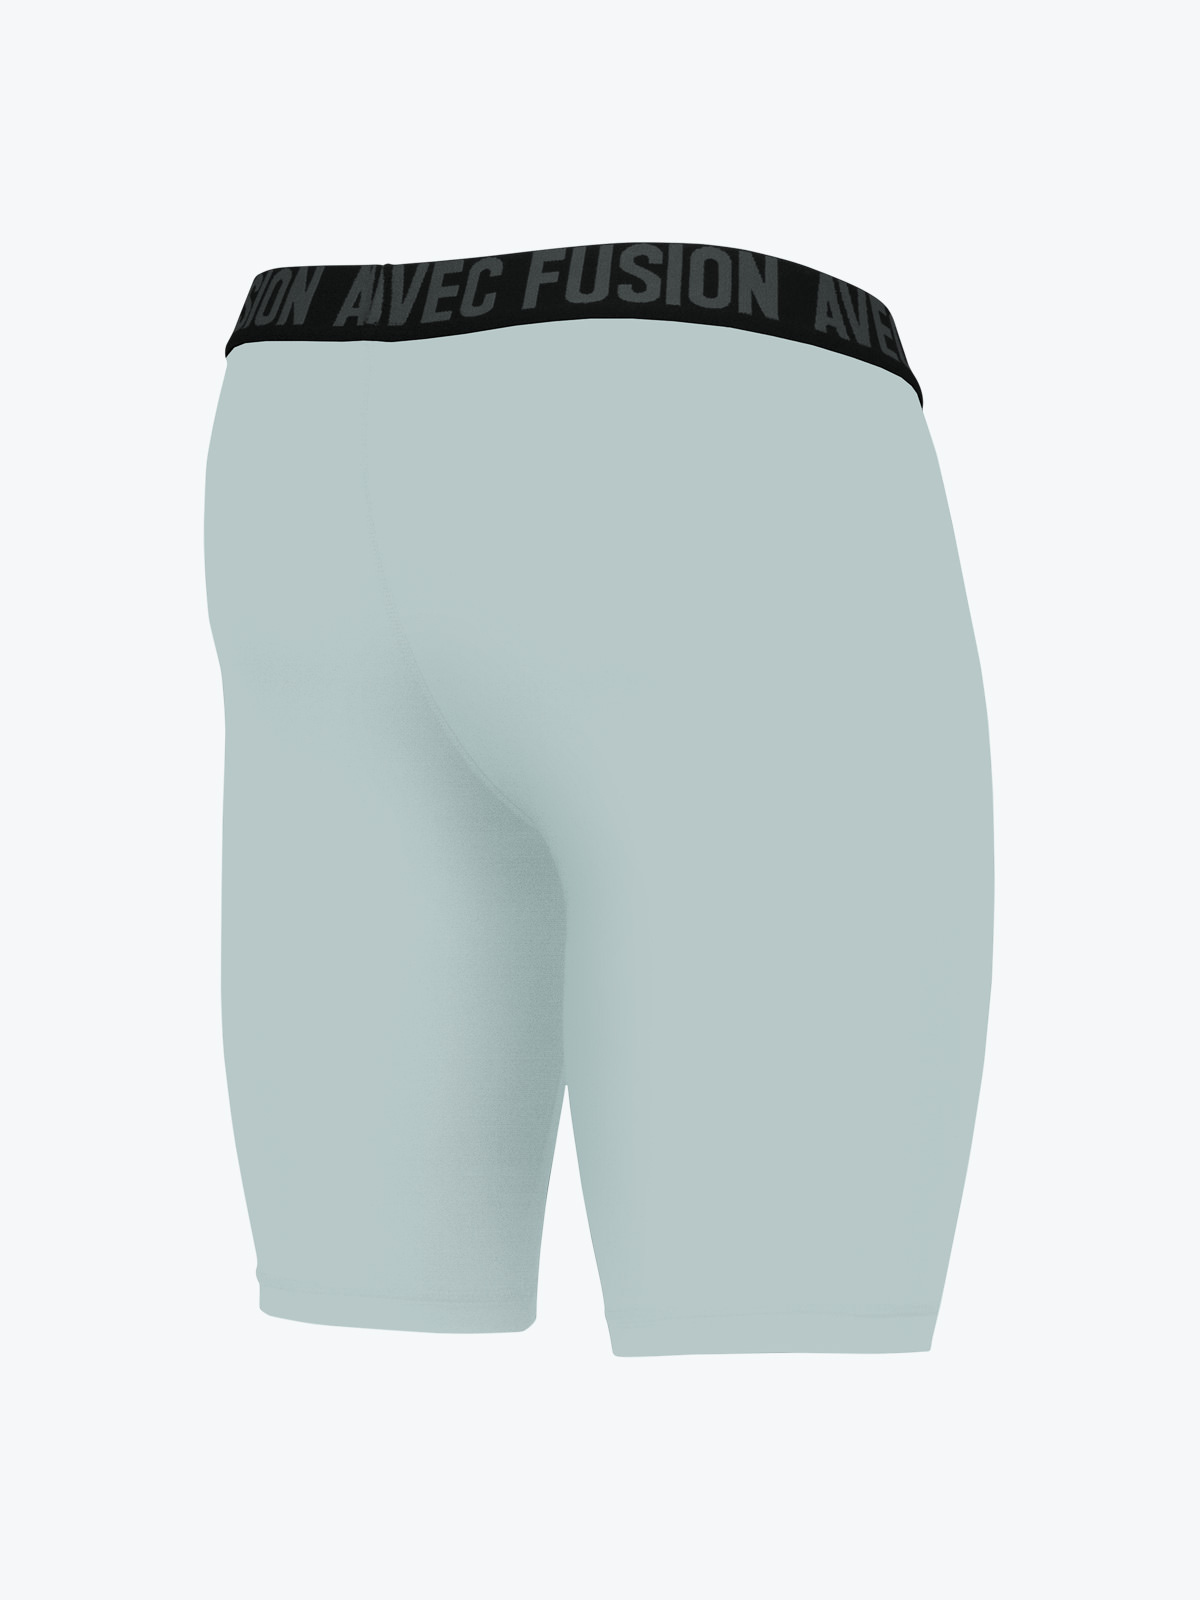 picture of fusion body fit short - grey